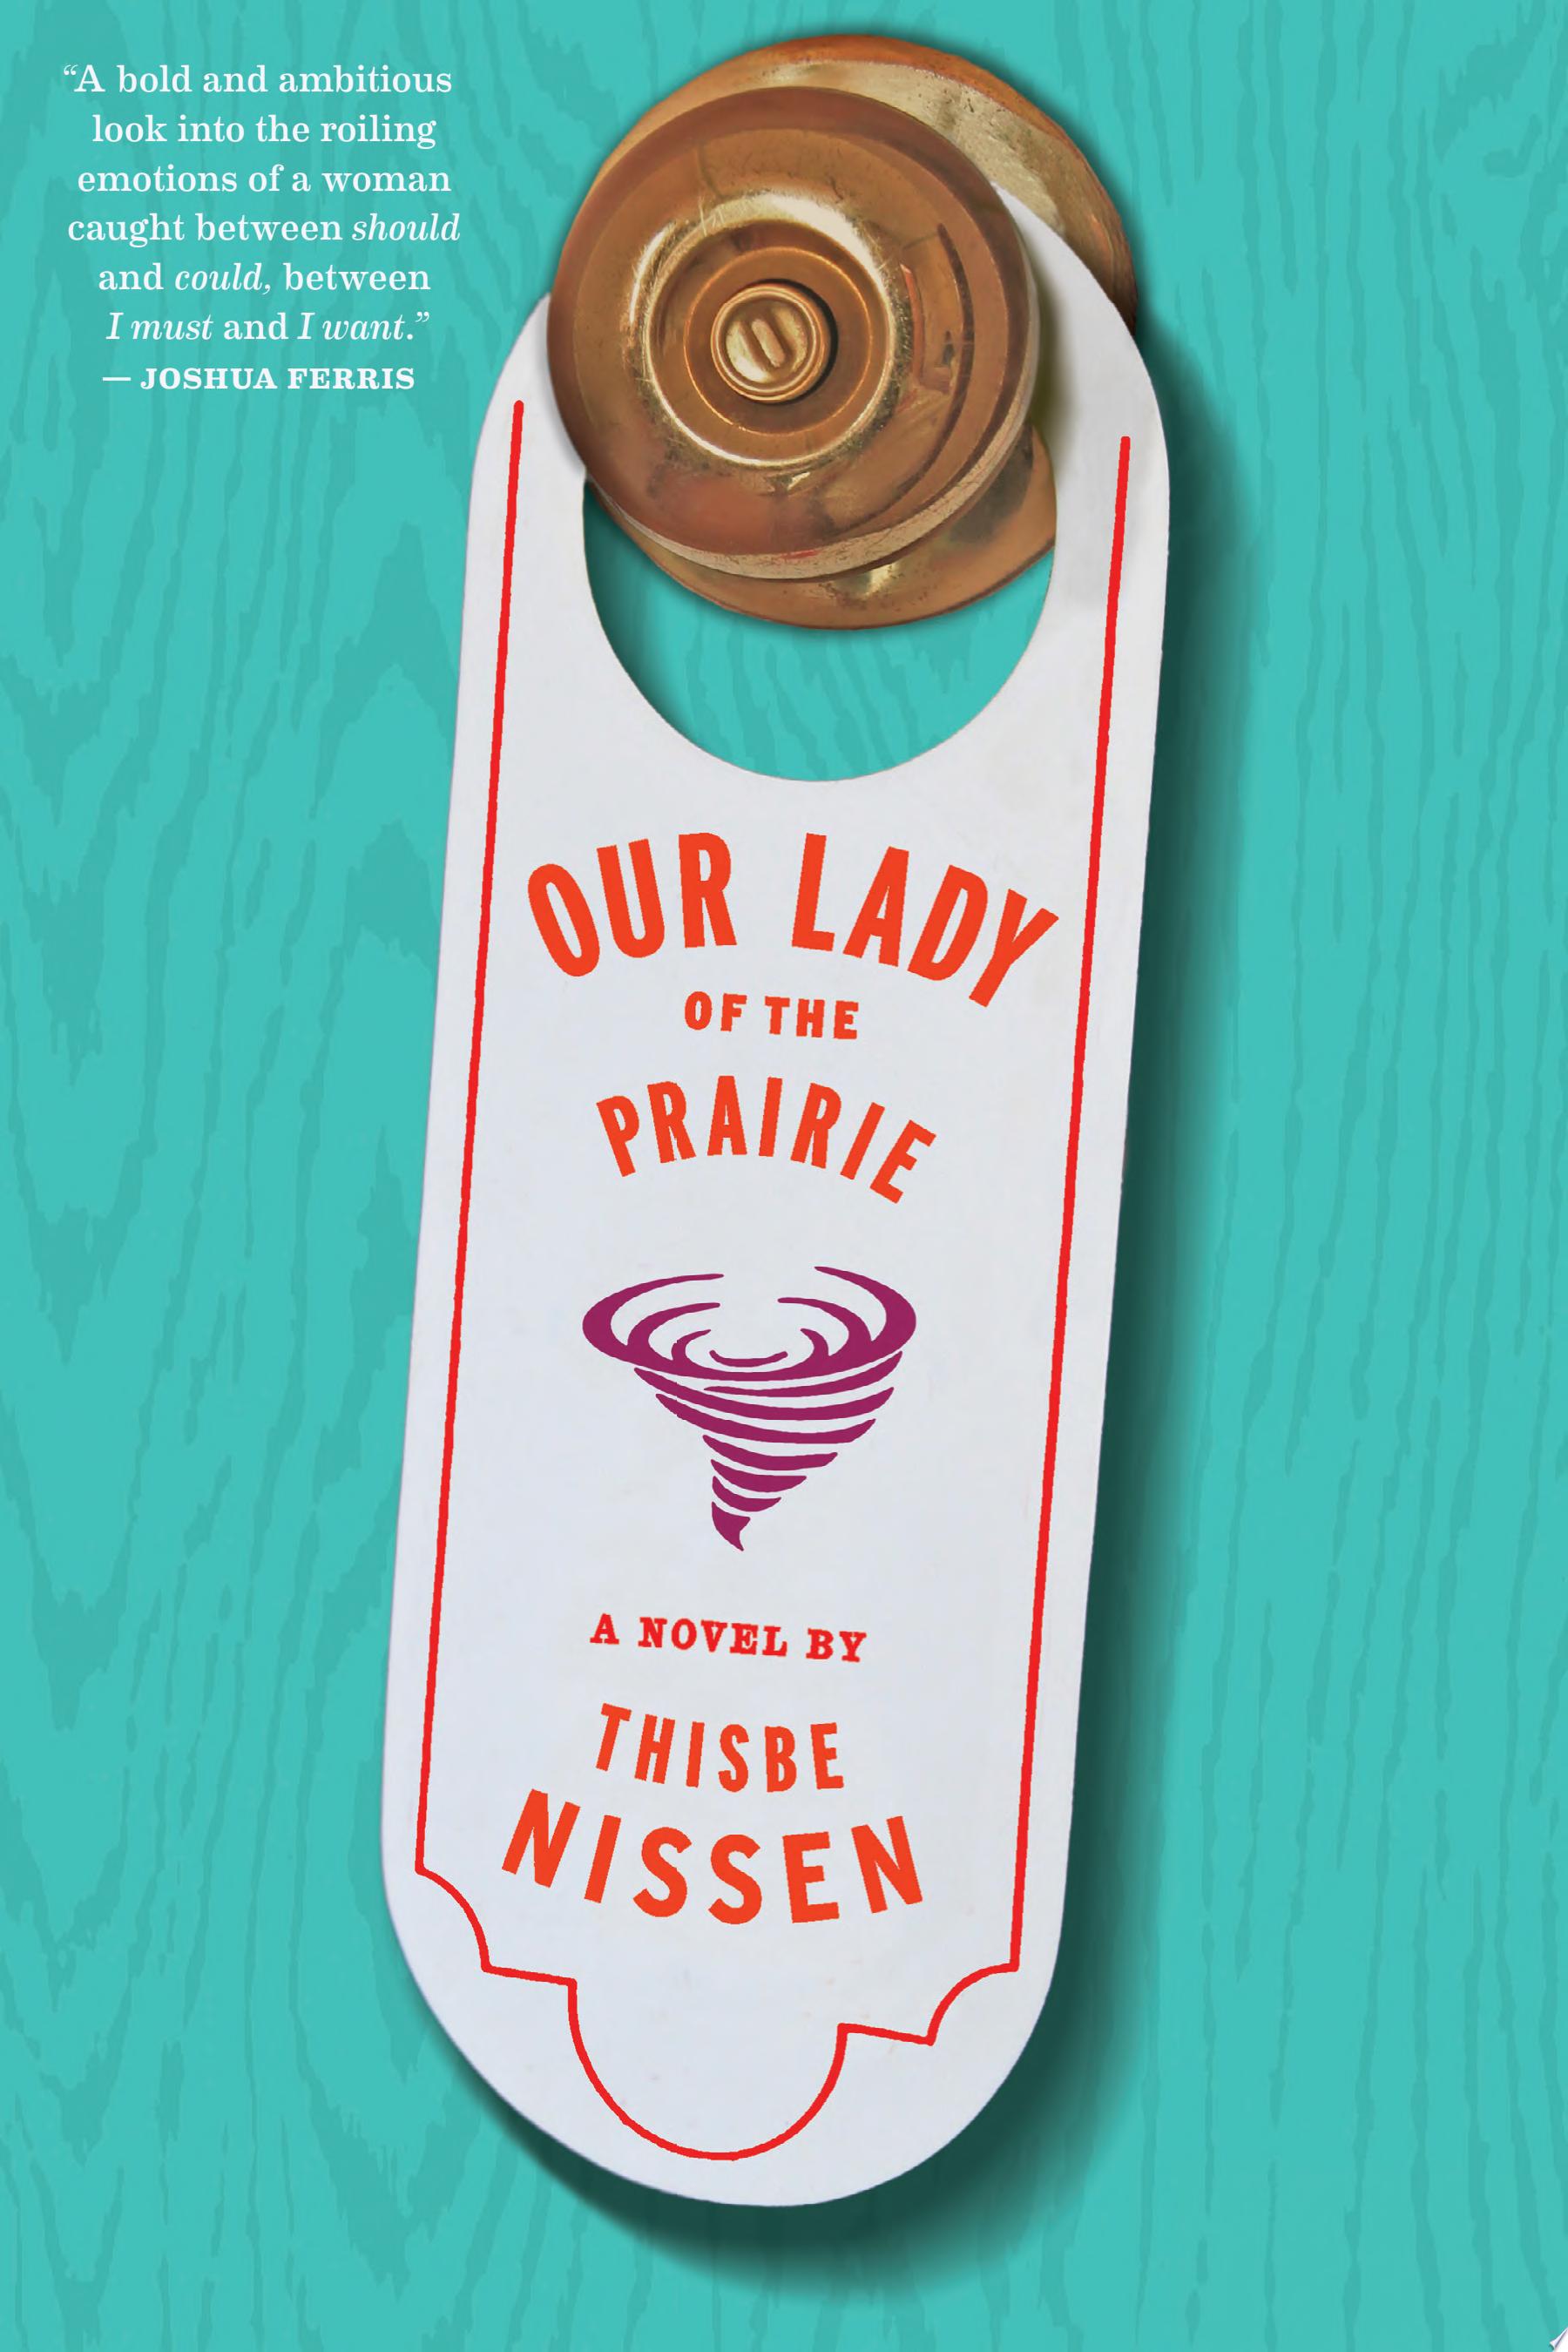 Image for "Our Lady of the Prairie"